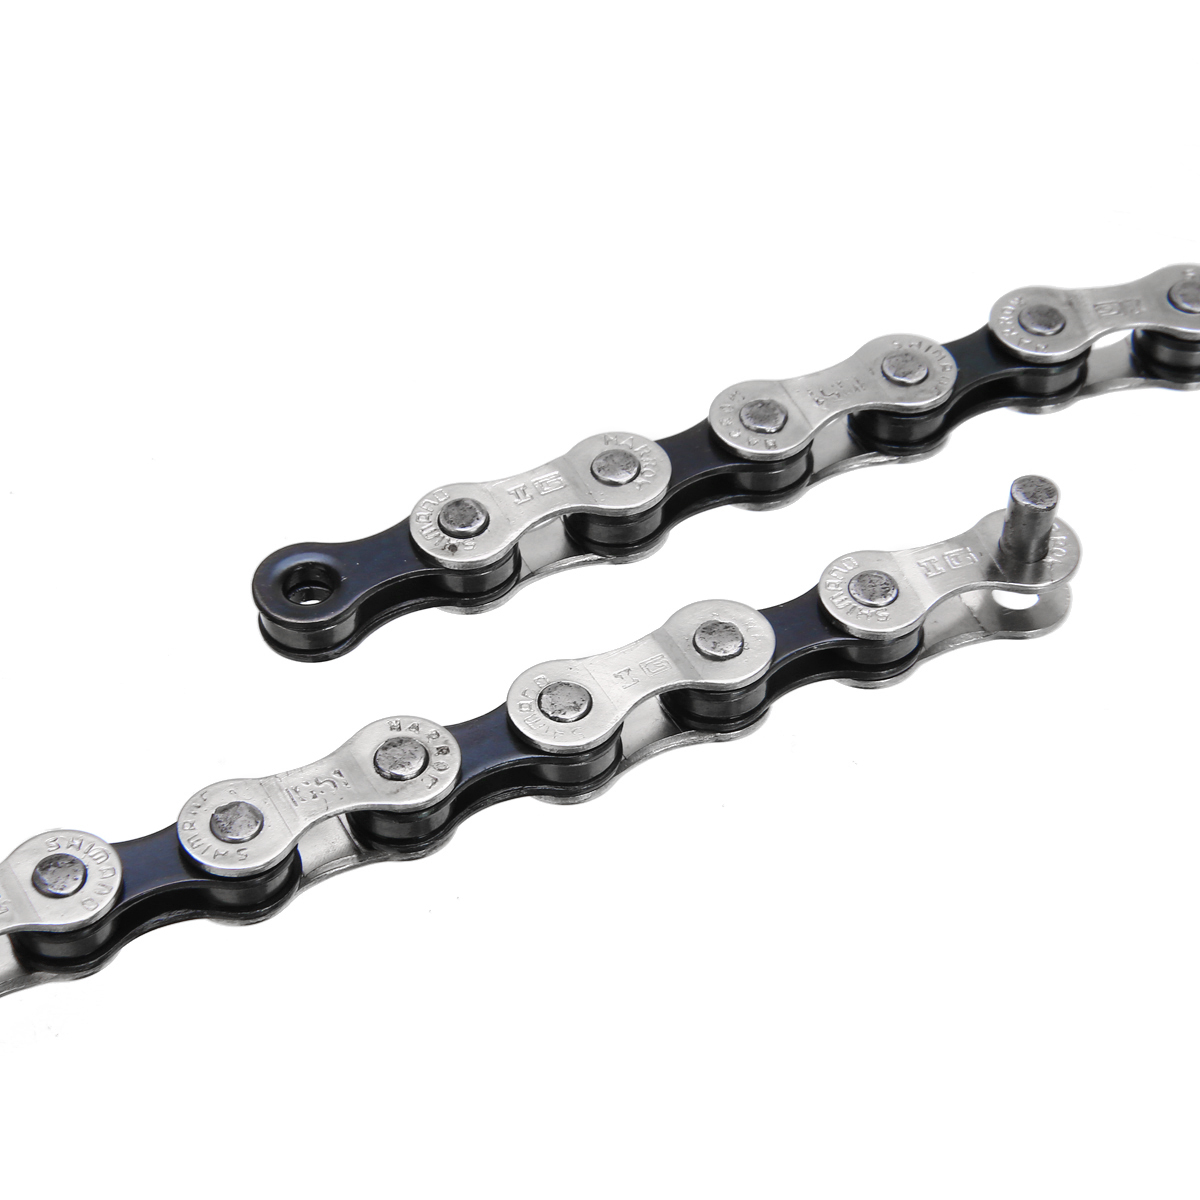 New Bicycle Chain Mountain Road Bike Bicycle Chain 8/24 Speed 116 Links For Shimano IG51 Cycling Accessories Durable